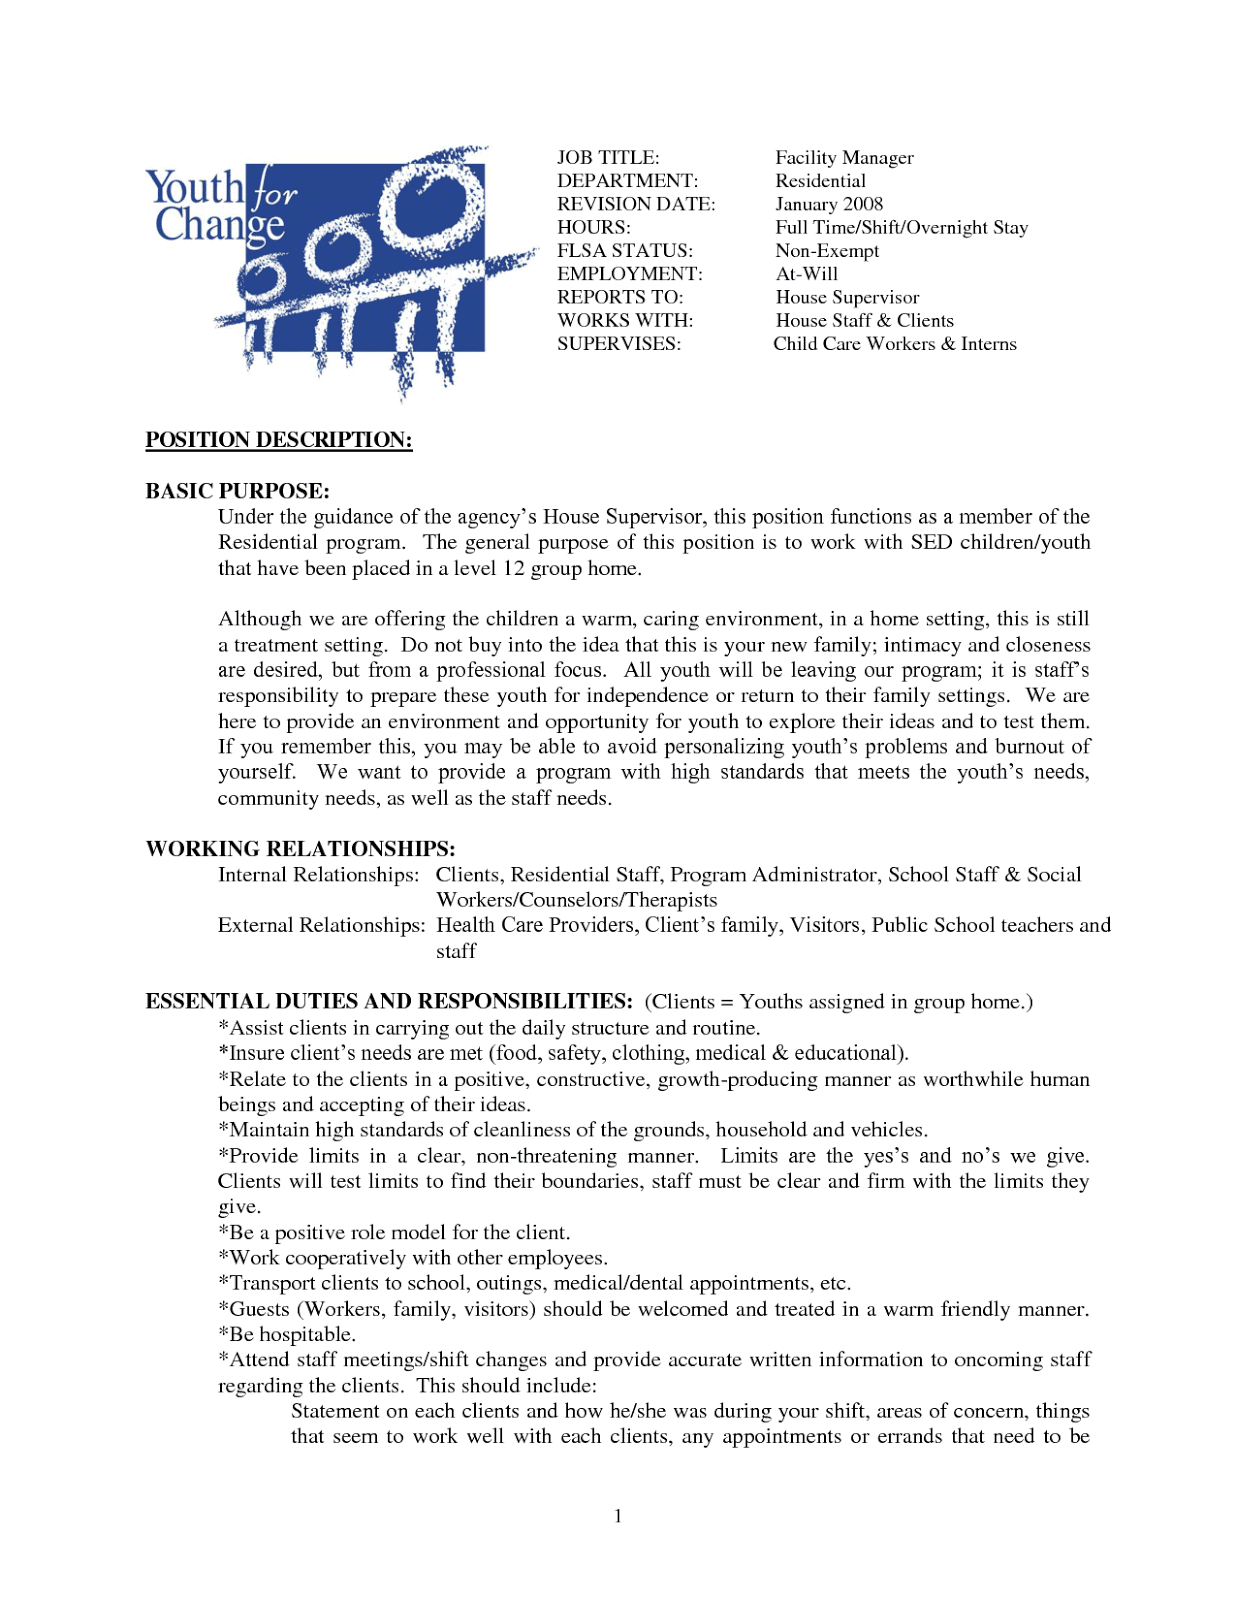 Duties of a housekeeper on a resume